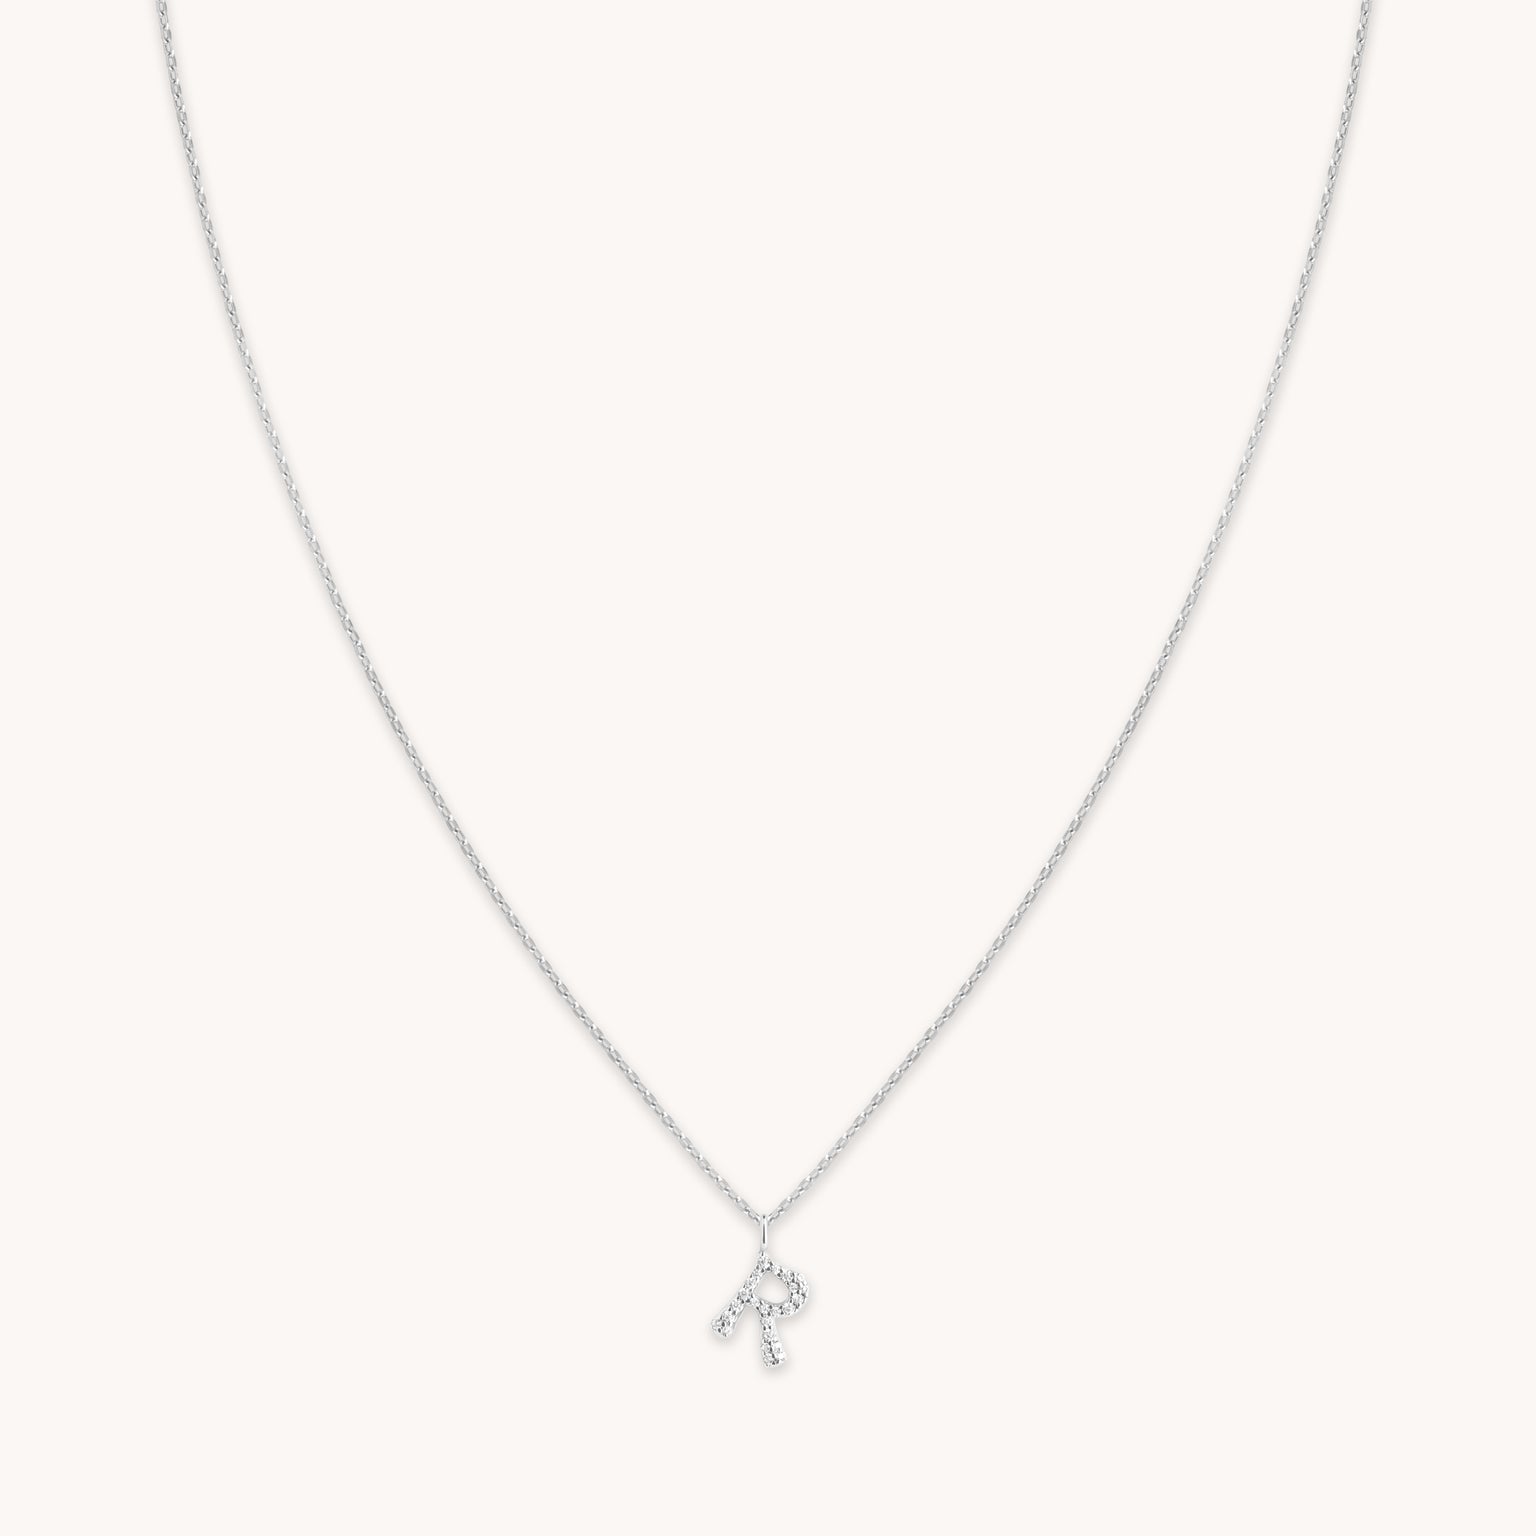 R Initial Pavé Pendant Necklace in Silver